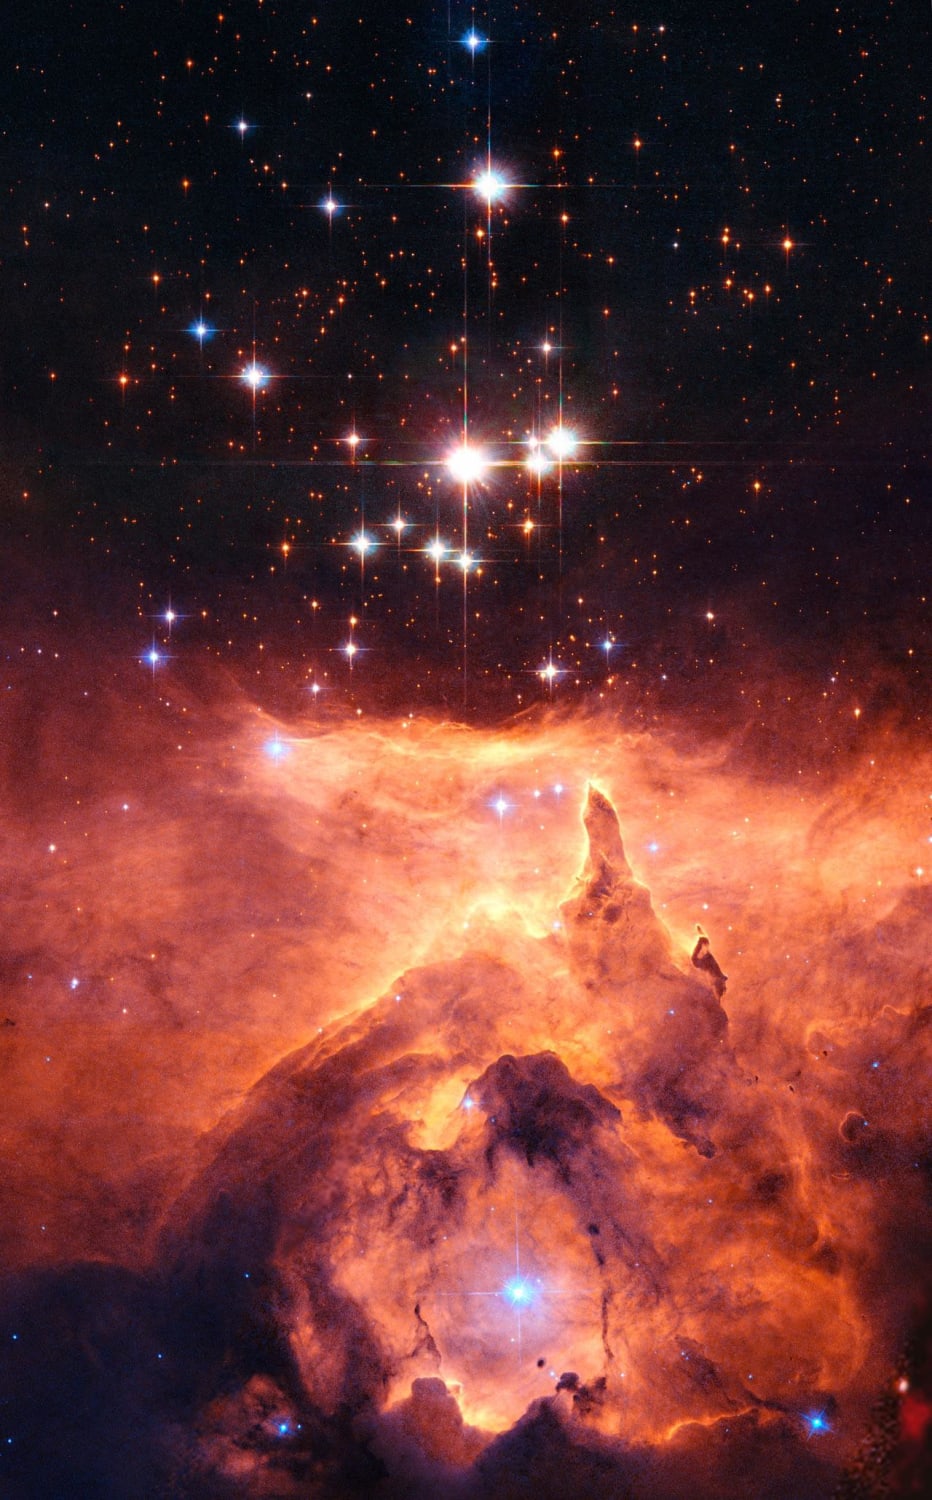 waiting for Hubble..The star cluster Pismis 24 lies in the core of the large emission nebula NGC 6357 that extends one degree on the sky in the direction of the Scorpius constellation..